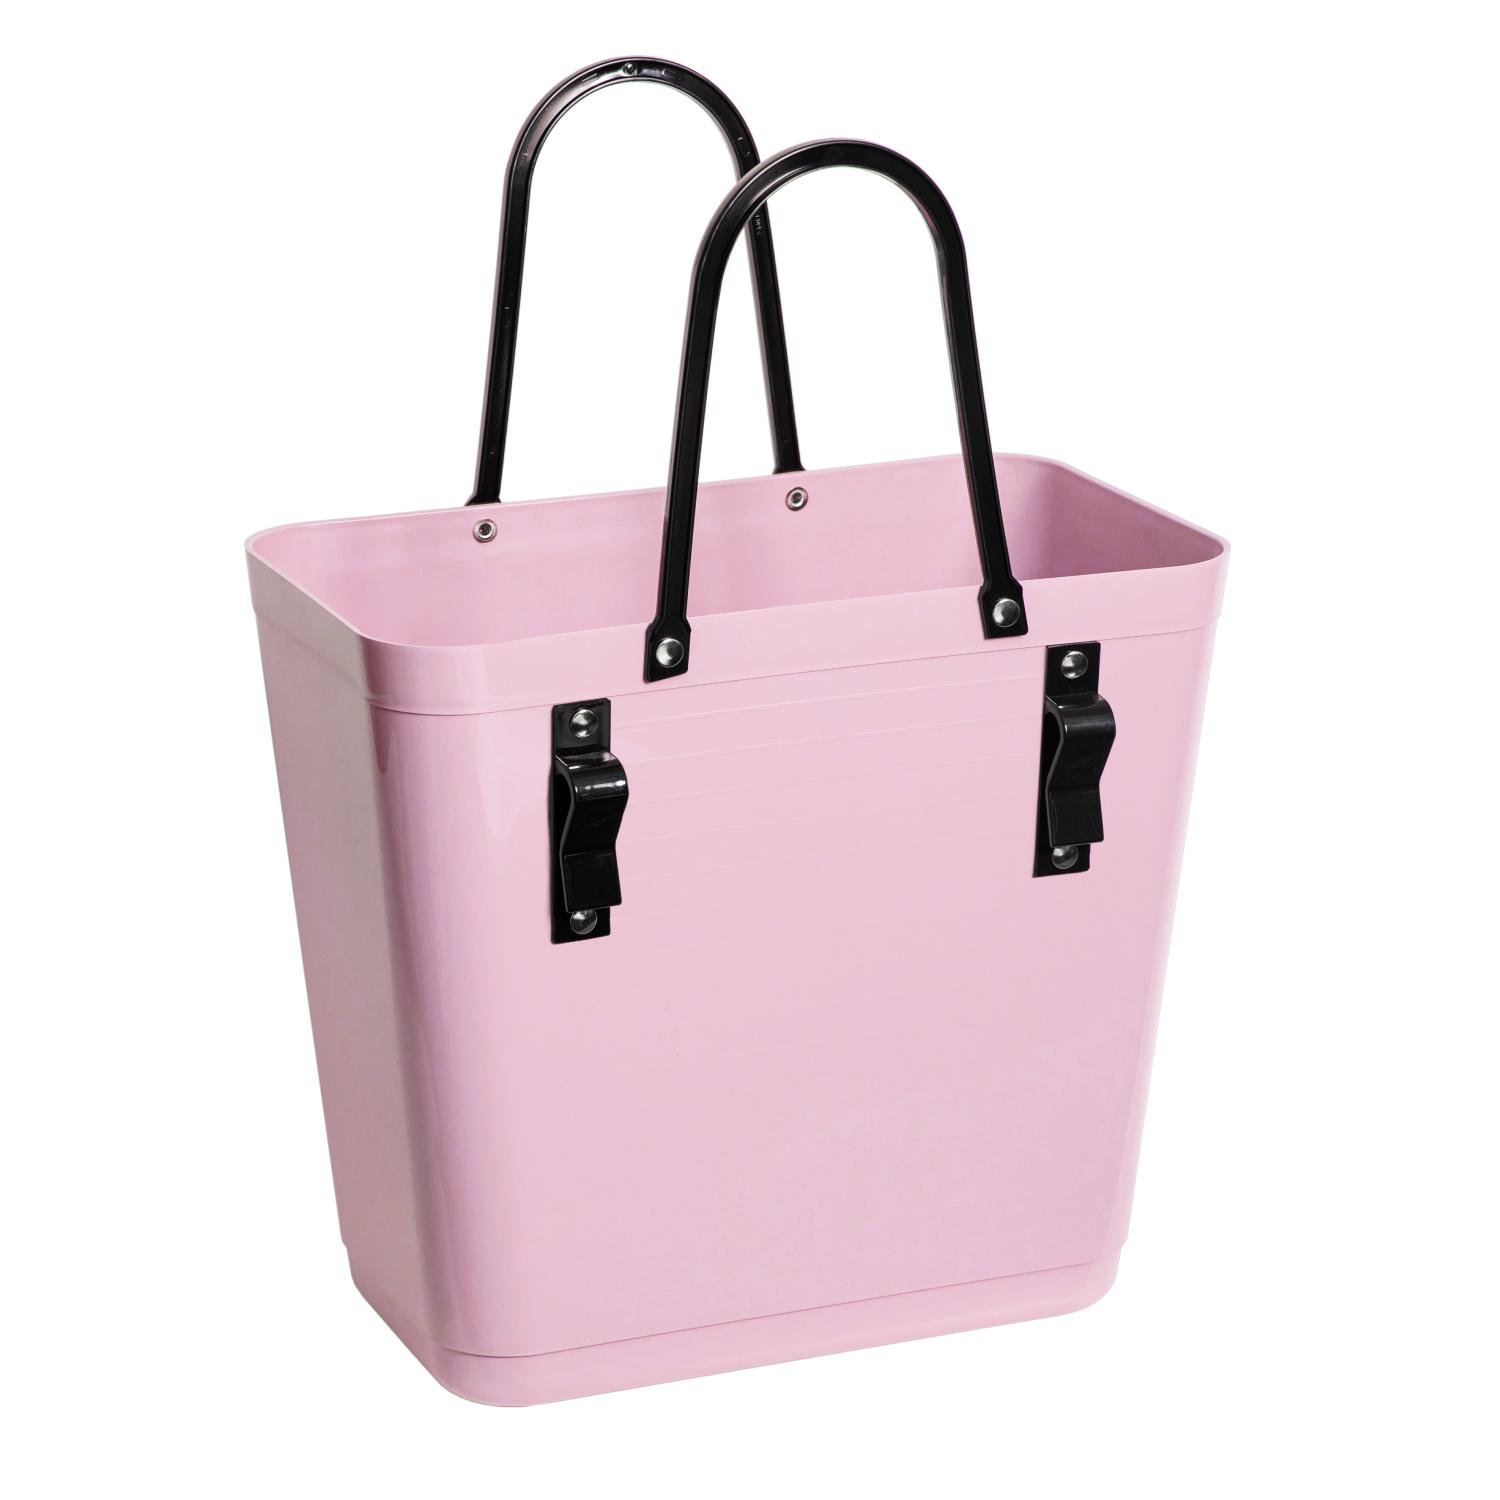 Hinza bag Tall with bicycle hooks, Dusty Pink - Recycled Plastic